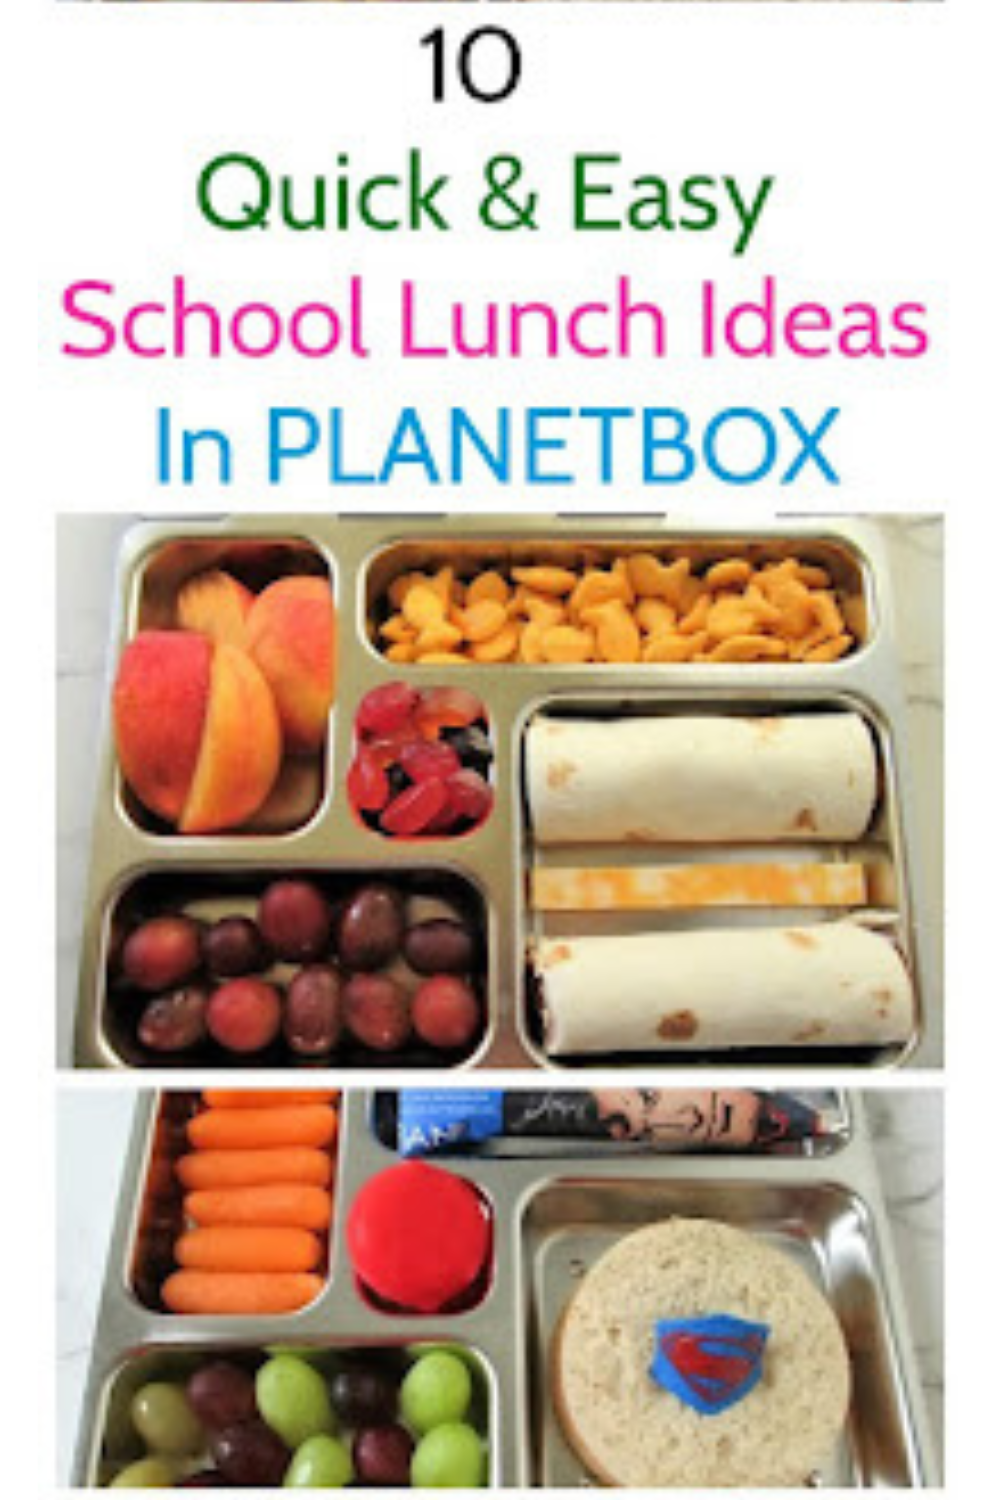 Bento School Lunches : Review: Warmables Lunchbox Kit